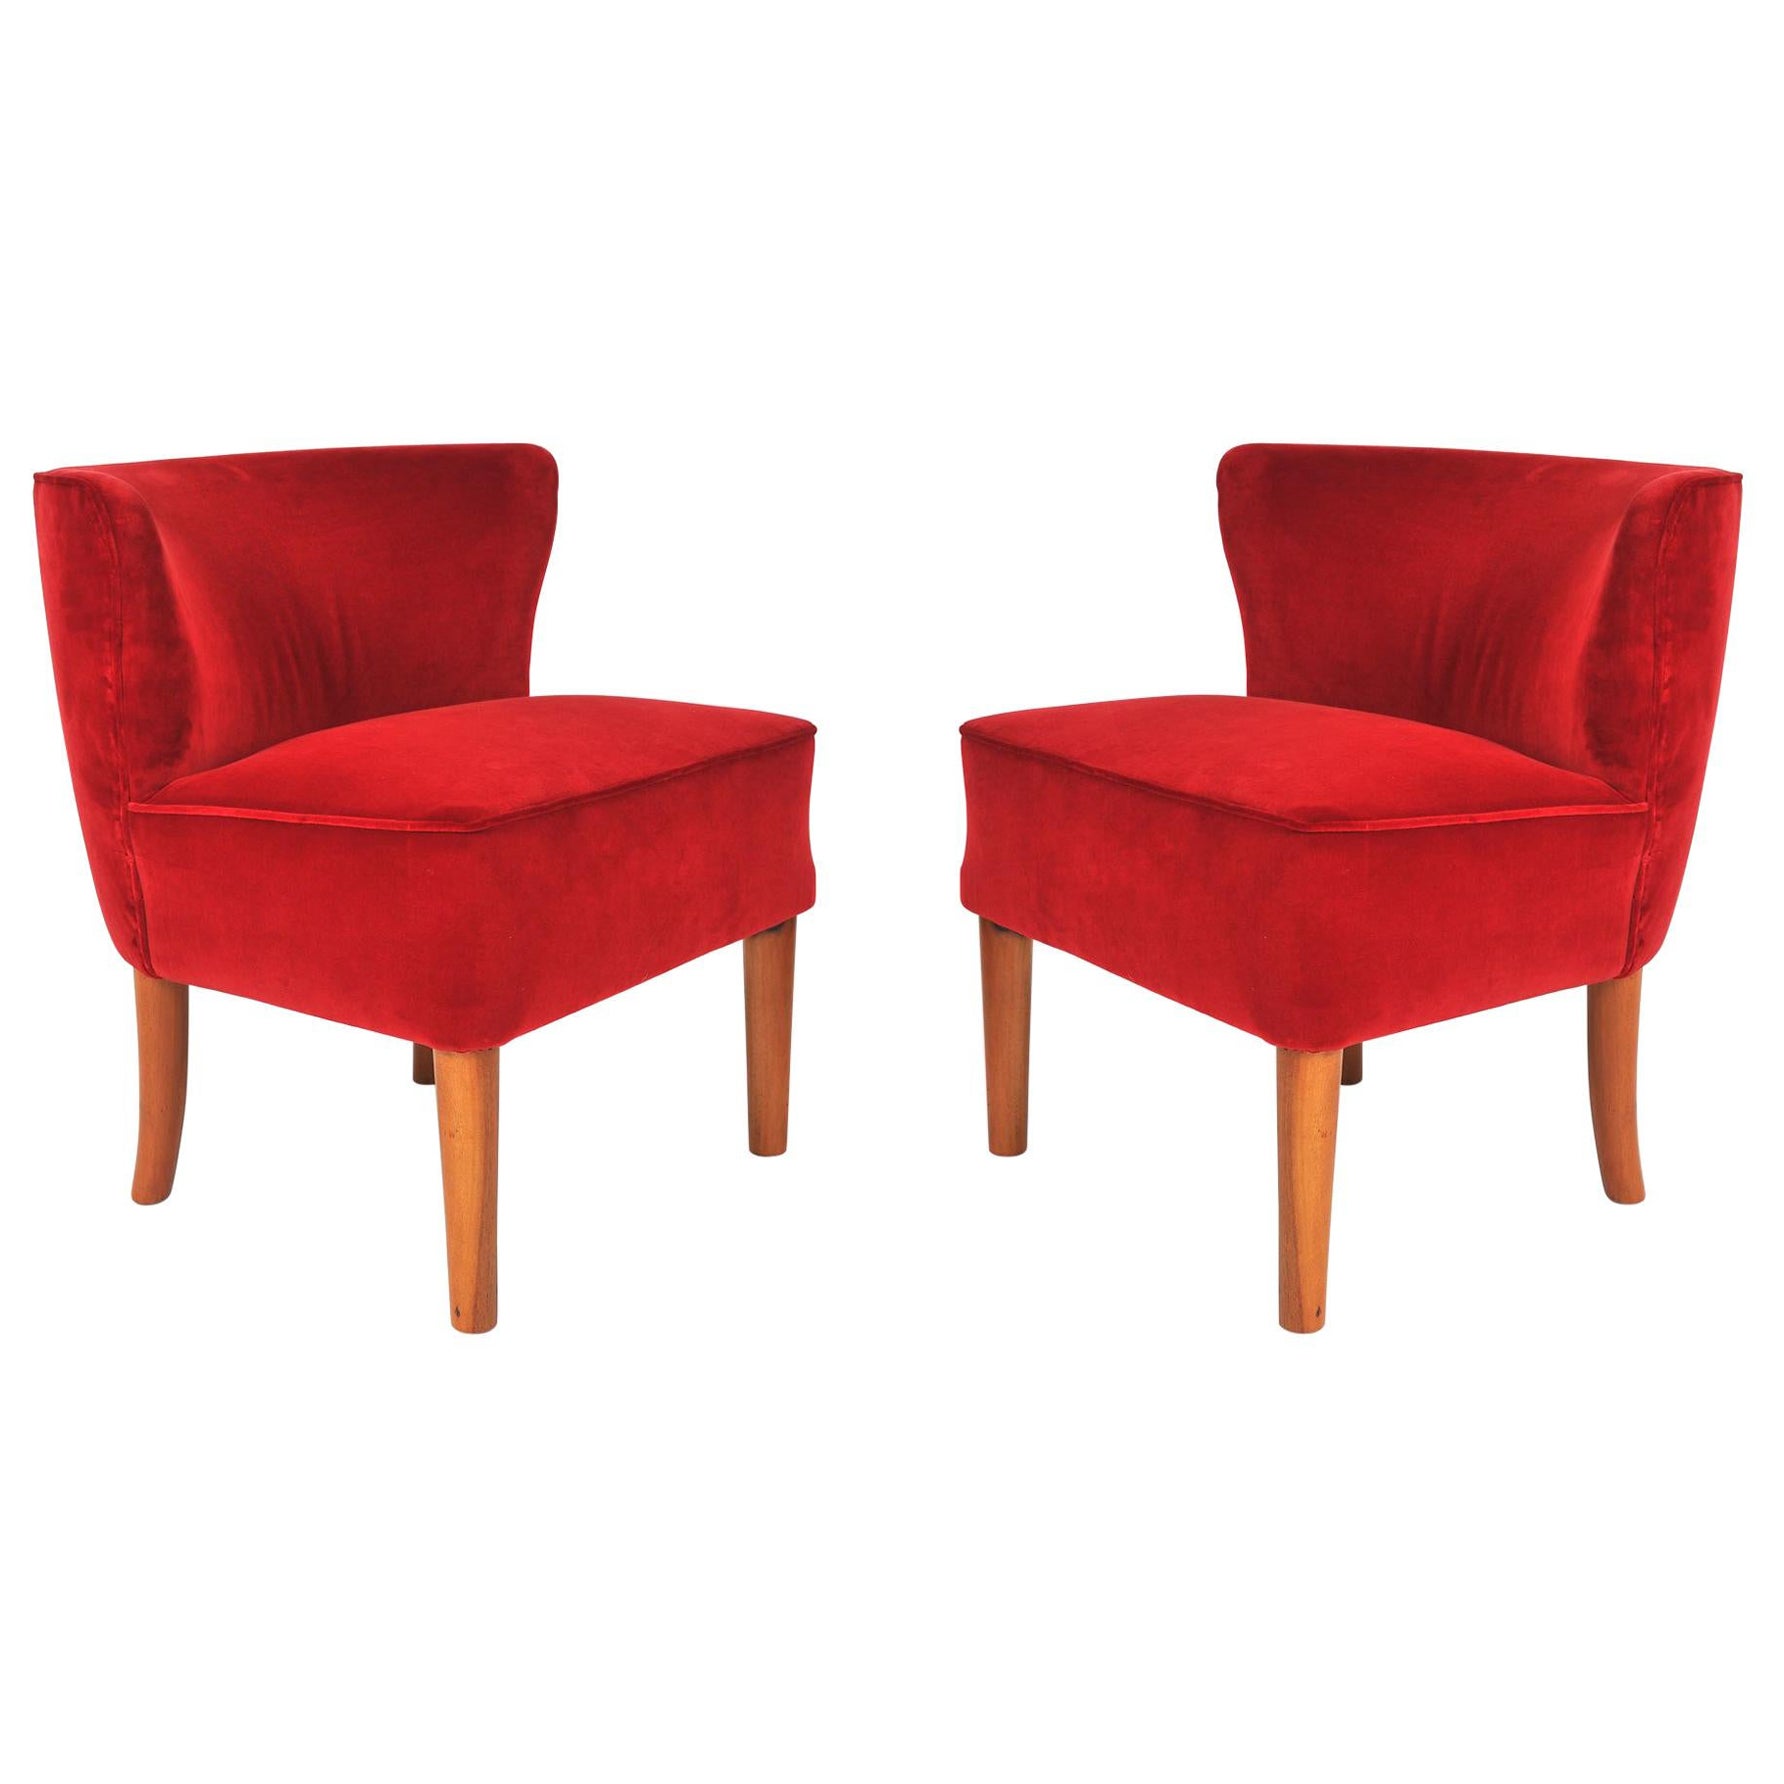 Pair of 1950s Italian Red Occasional Chairs For Sale